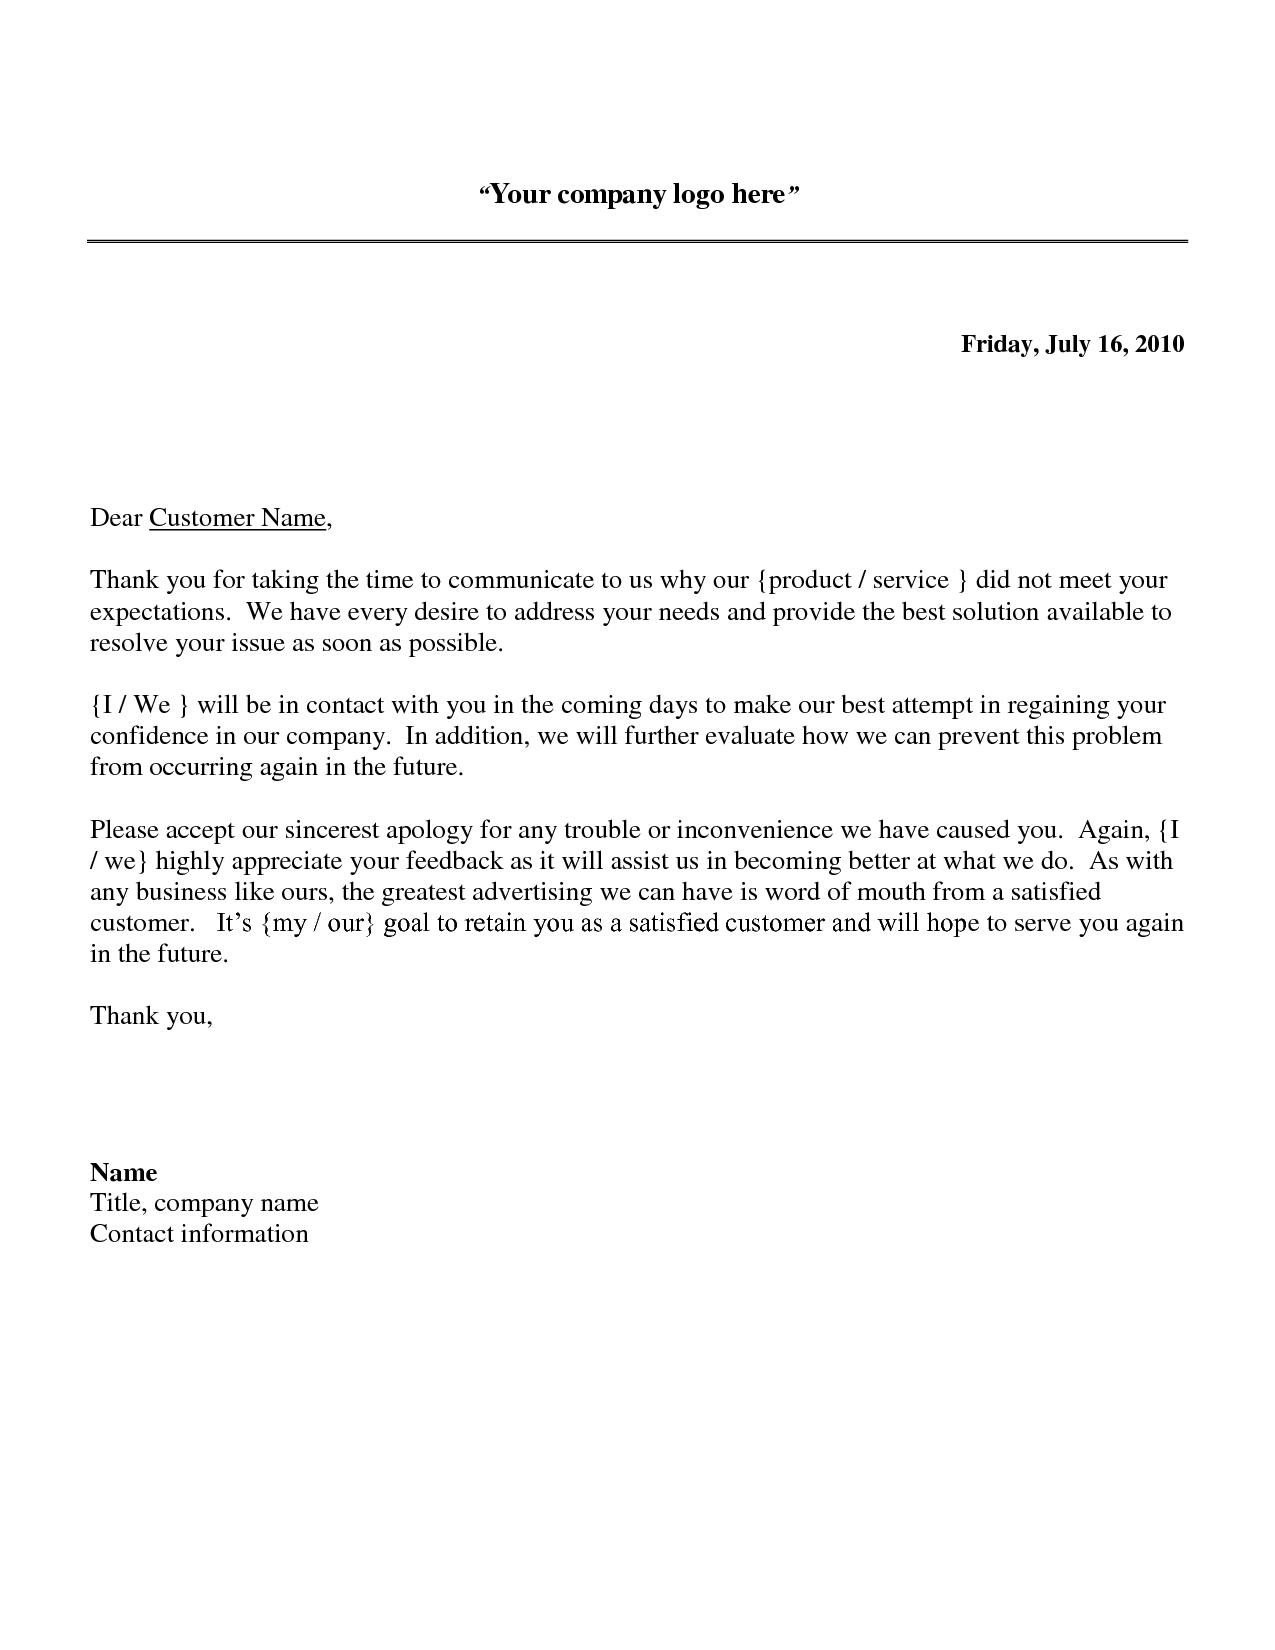 apology letter to customer for error | business letter template